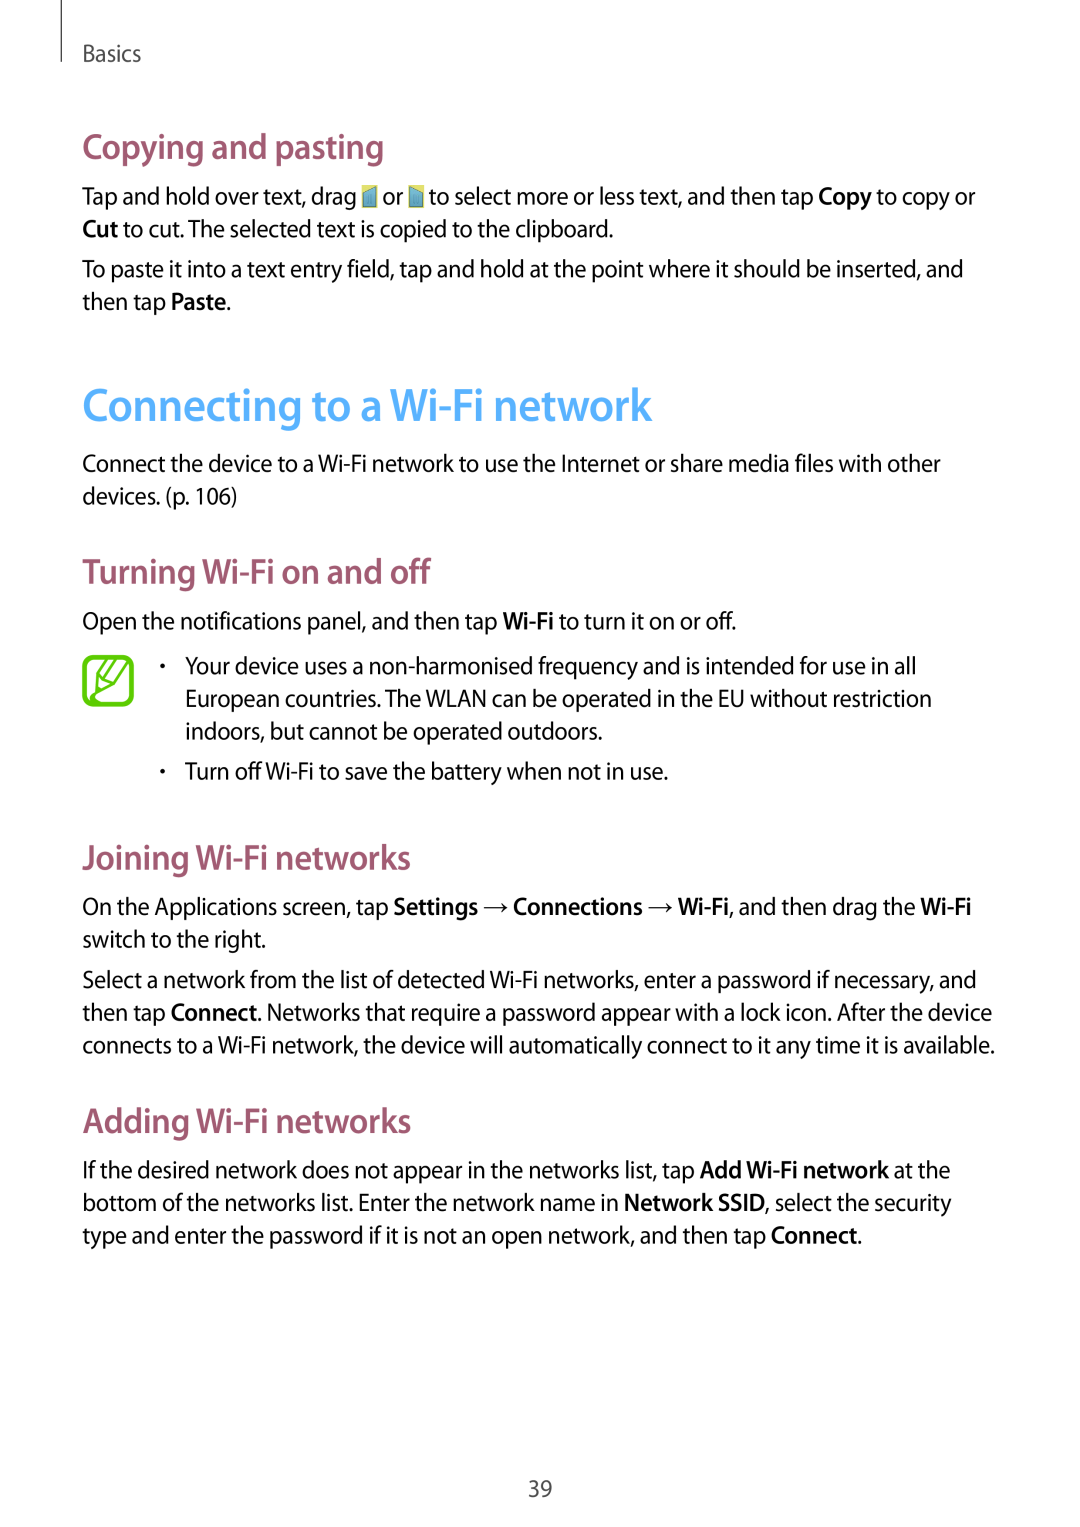 Samsung GT-I9305RWDKSS Connecting to a Wi-Fi network, Copying and pasting, Turning Wi-Fi on and off, Adding Wi-Fi networks 